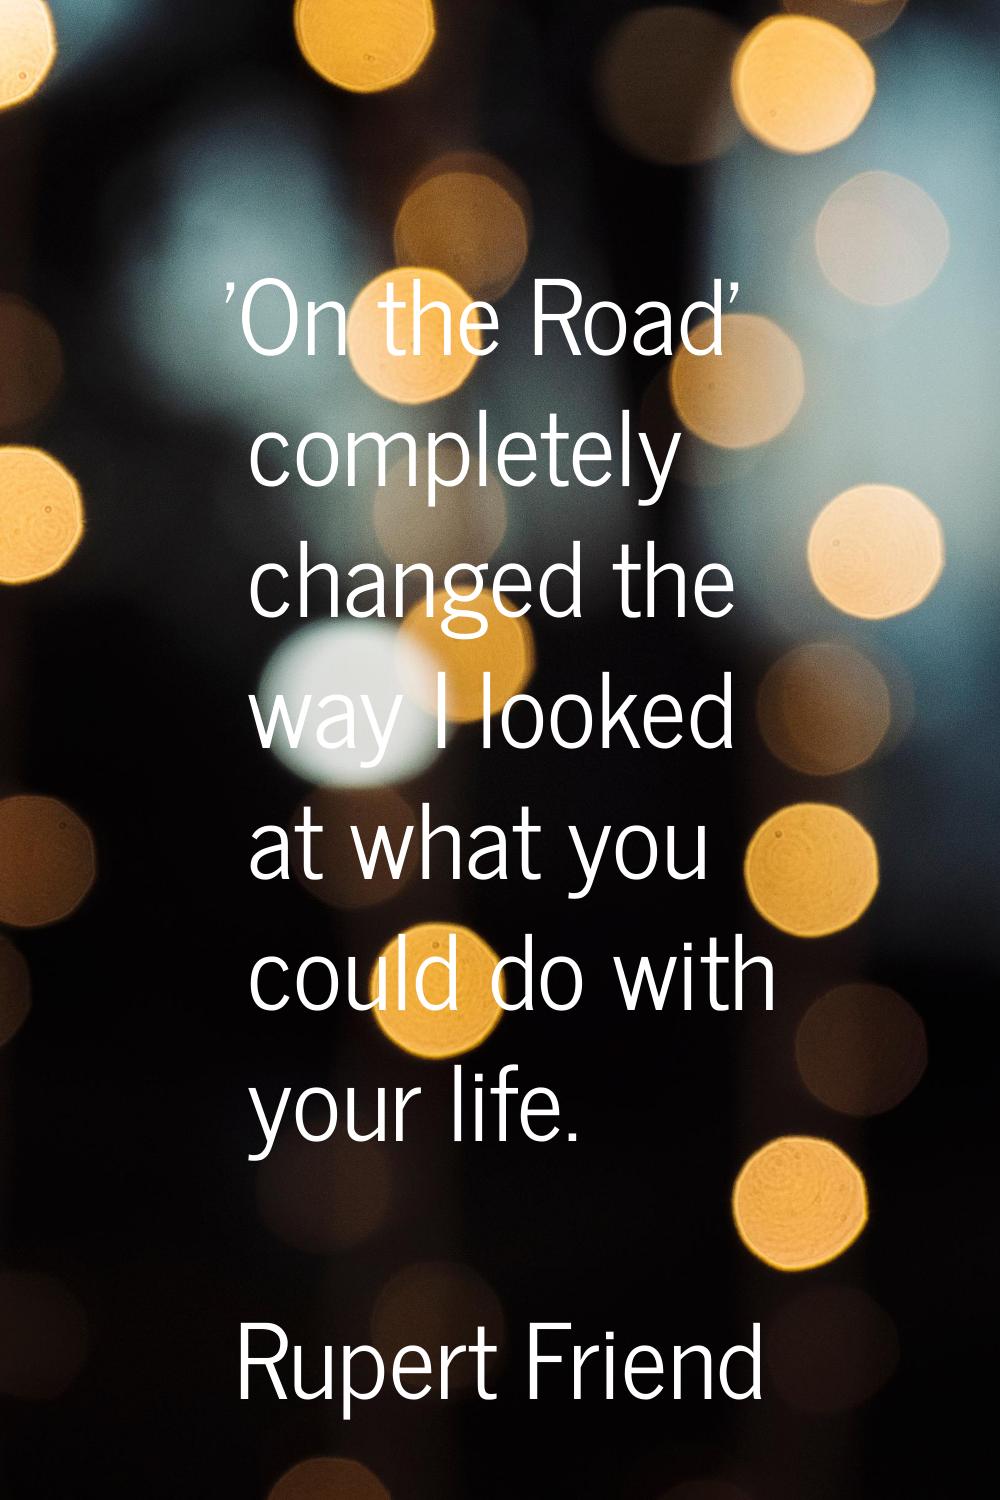 'On the Road' completely changed the way I looked at what you could do with your life.